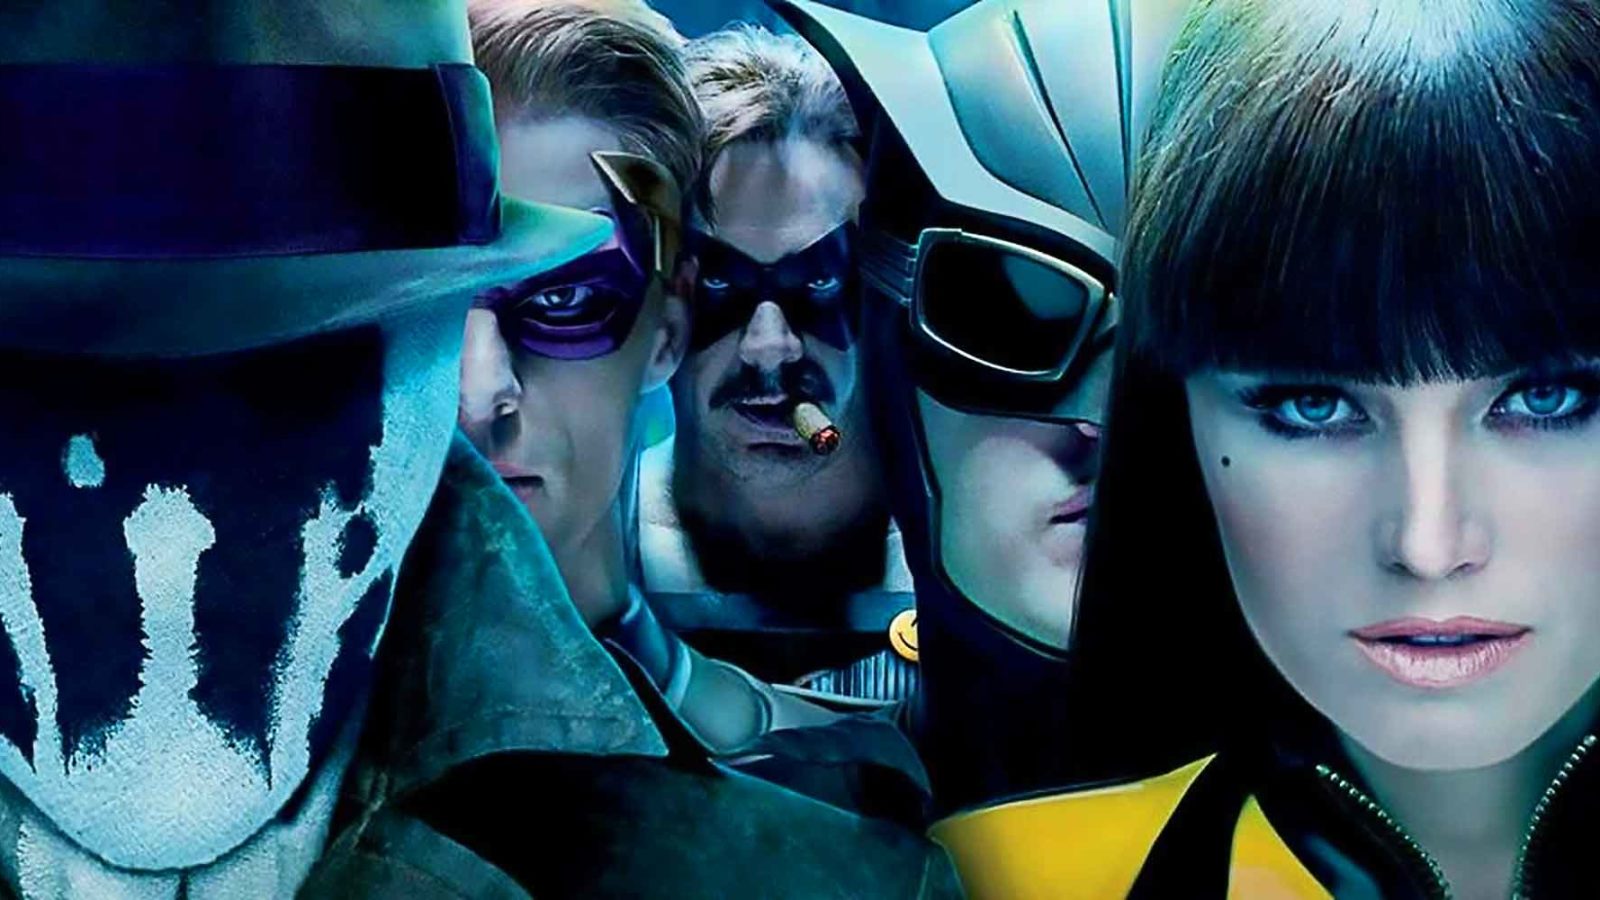 Latest Watchmen Trailer Features Film Dialogue And Stunning Visuals 2009